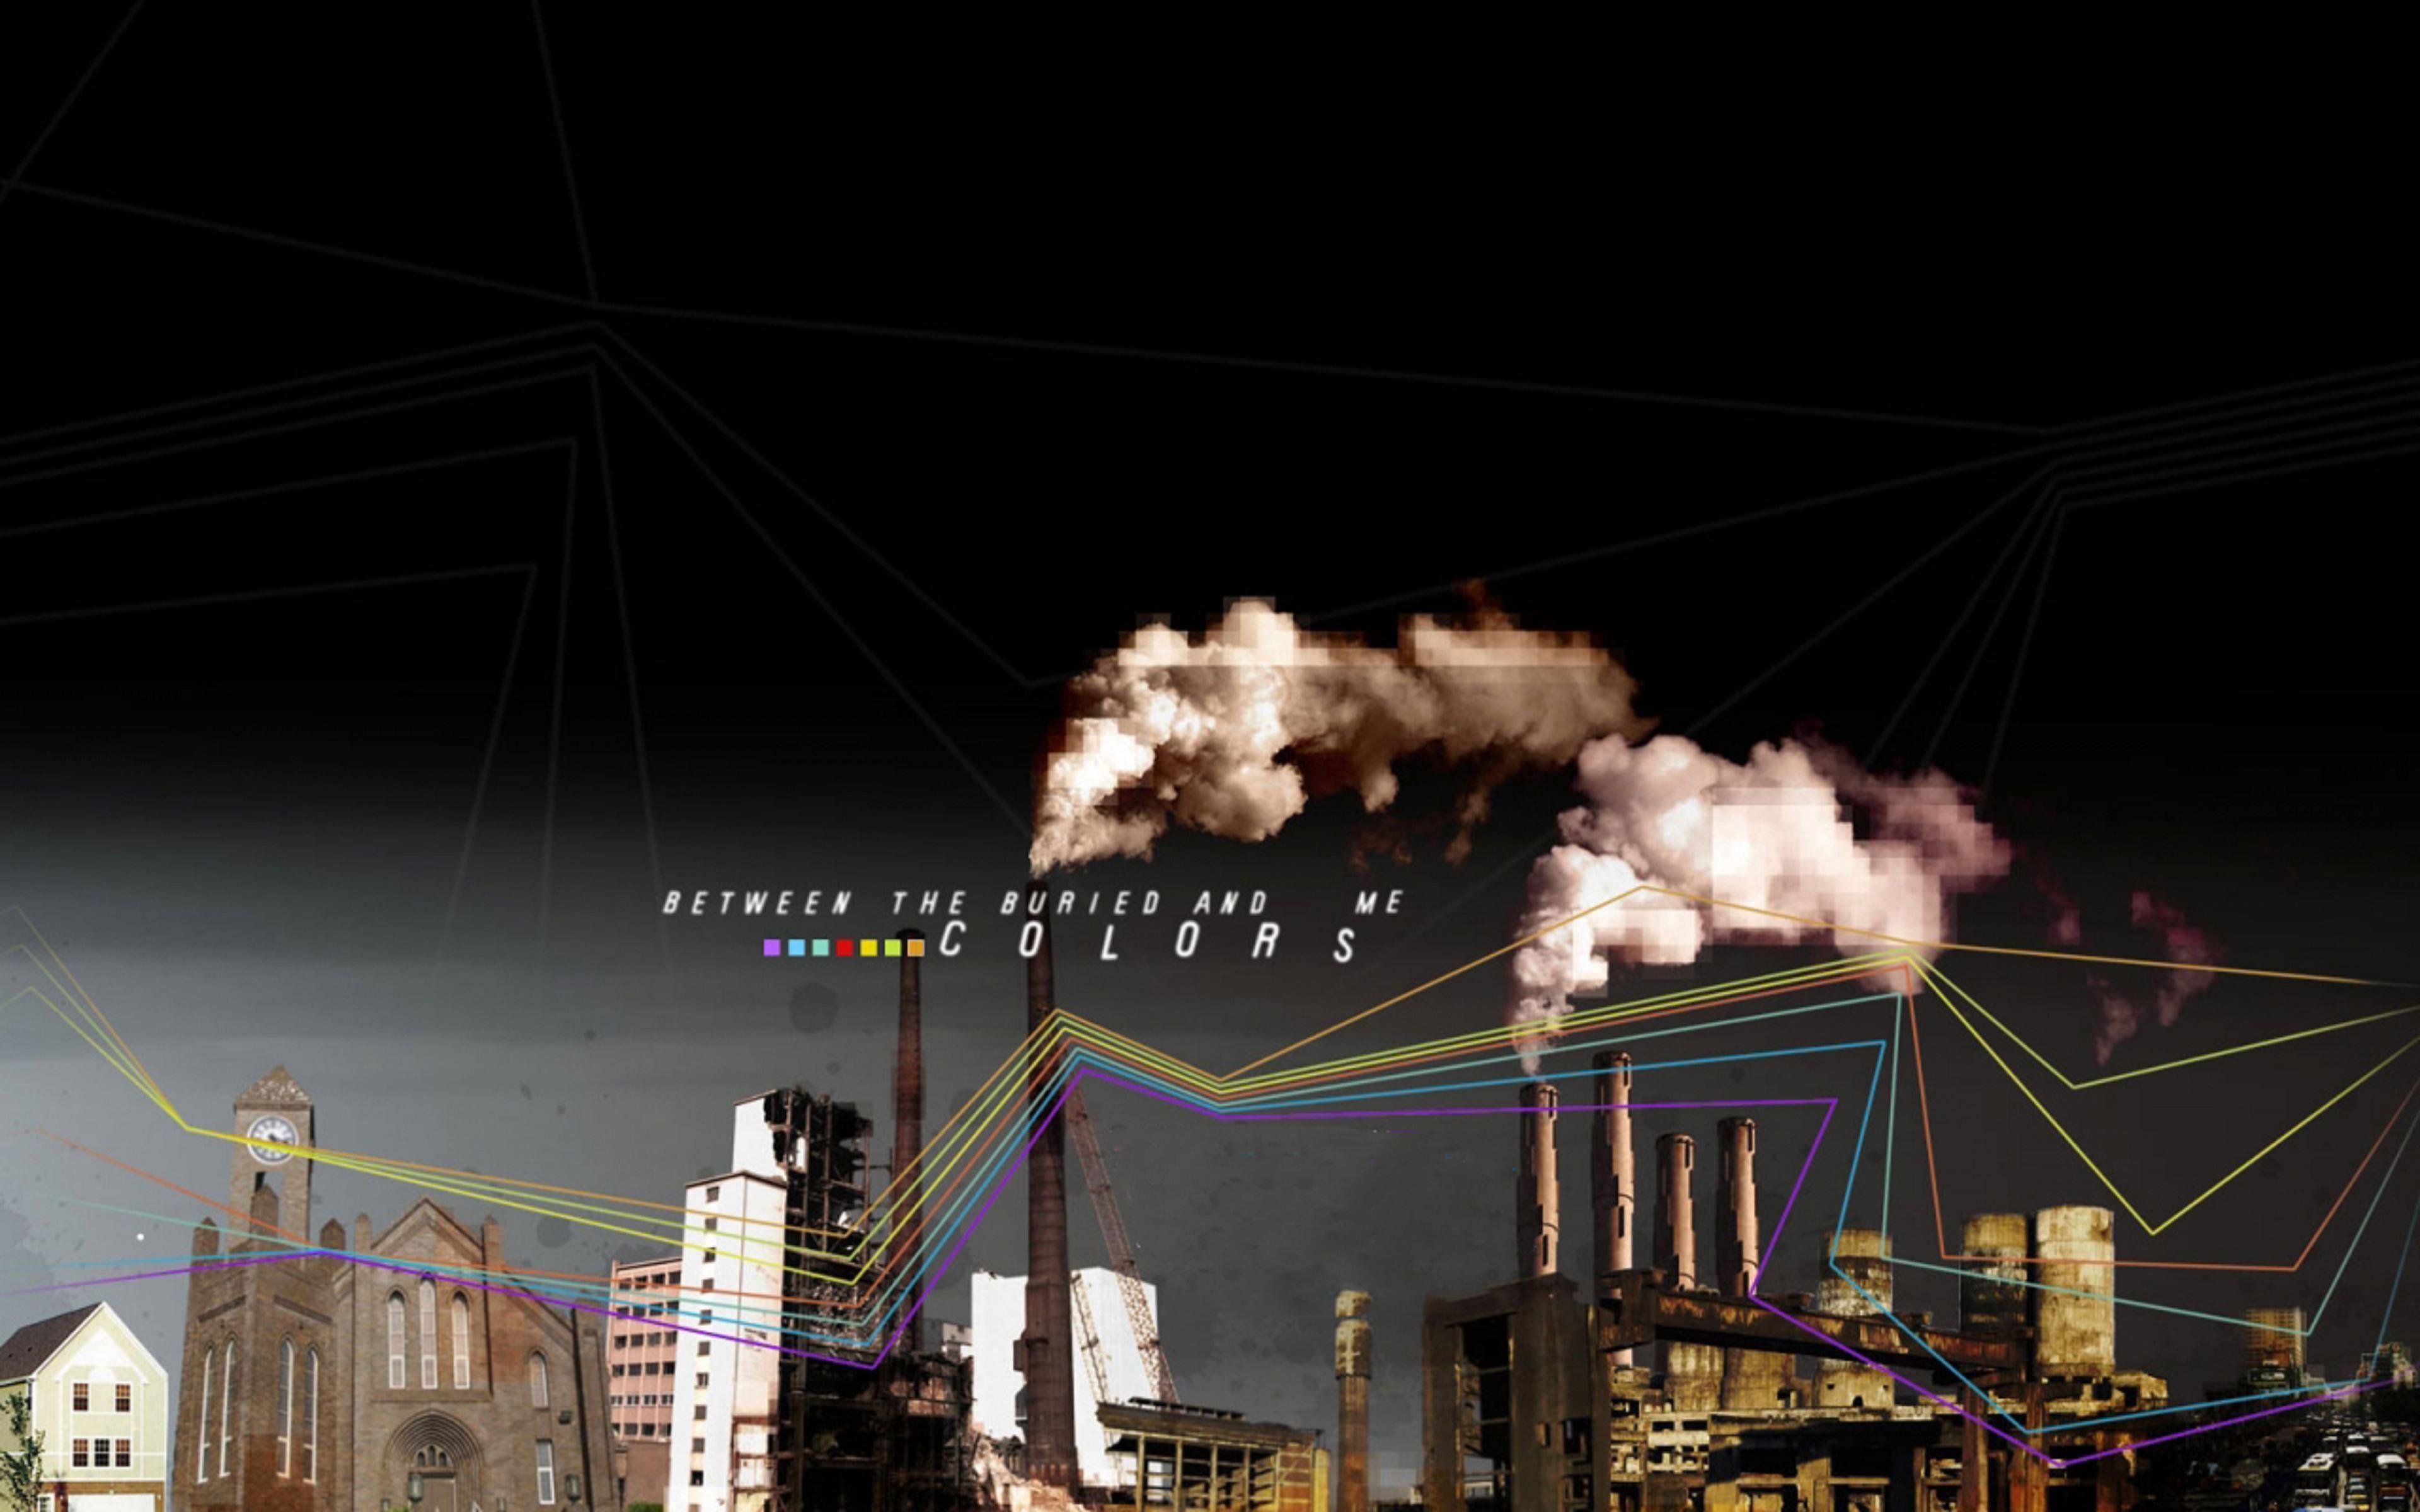 between the buried and me album covers VPS. Colorful wallpaper